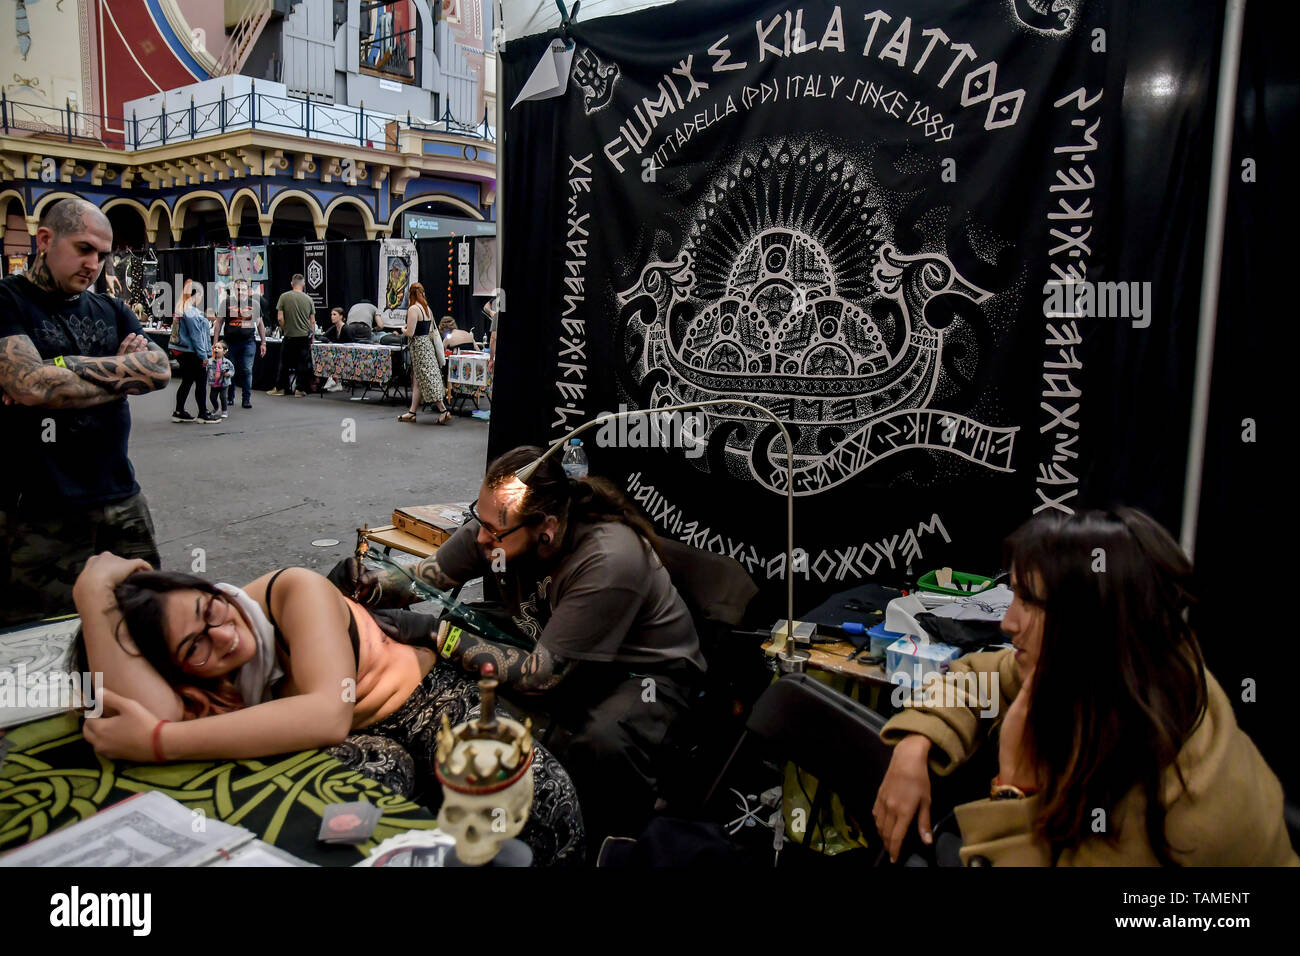 London, UK. 26th May, 2019. Fiumax & Kila tattoo, Tattoo a client at The Great British Tattoo Show, on 26 May 2019, London, UK. Credit: Picture Capital/Alamy Live News Stock Photo